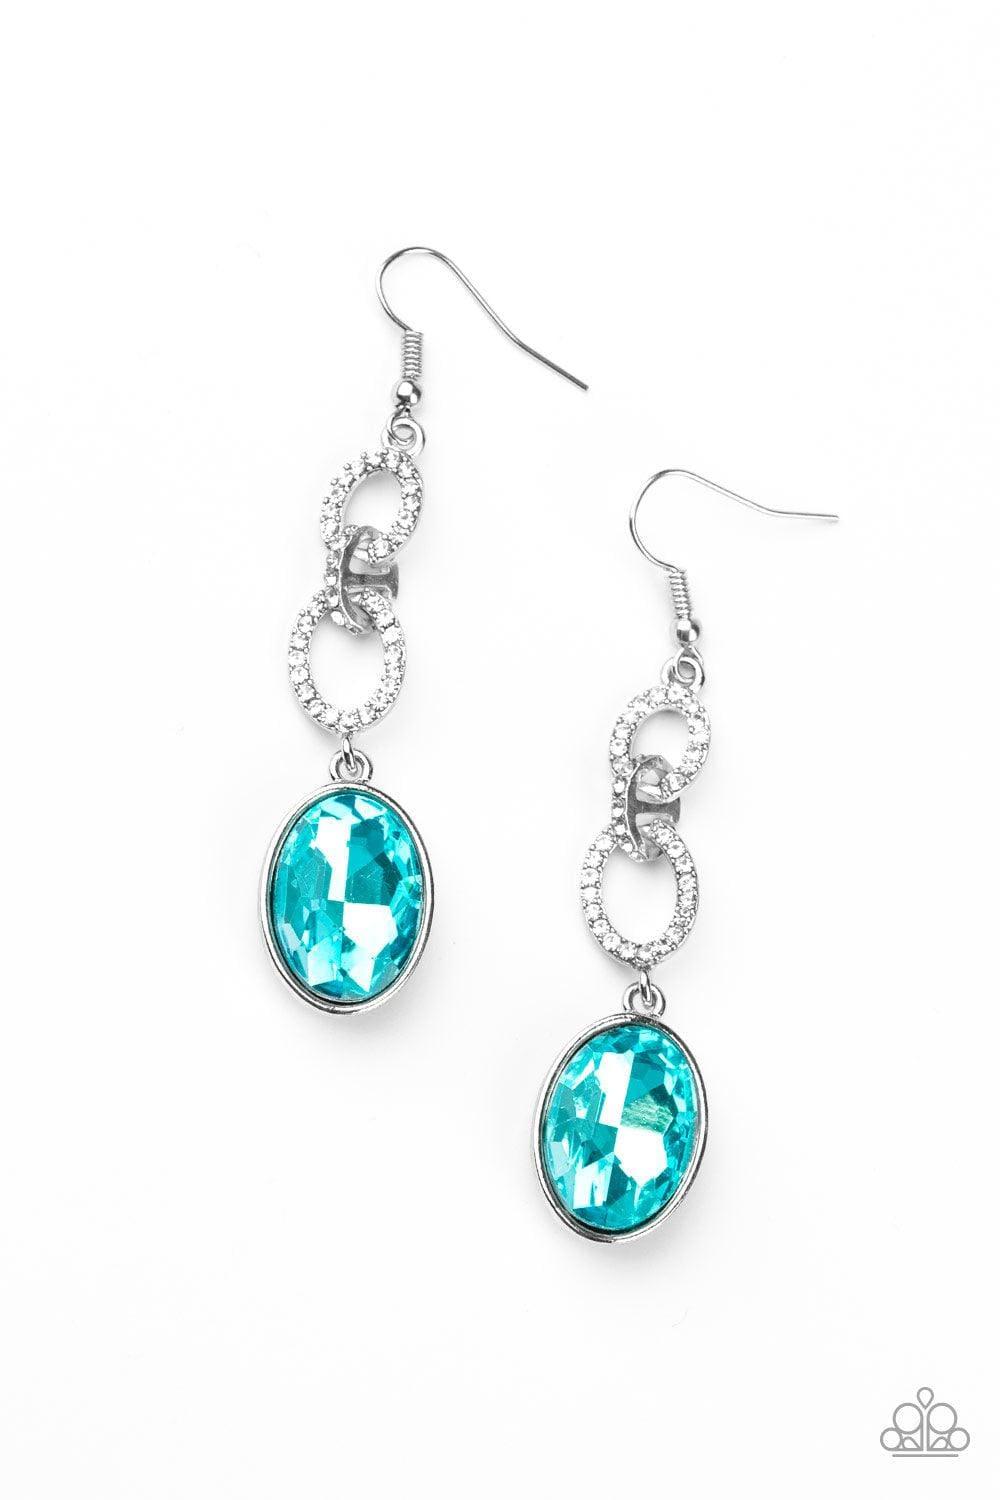 Paparazzi Accessories - Extra Ice Queen - Blue Earrings - Bling by JessieK